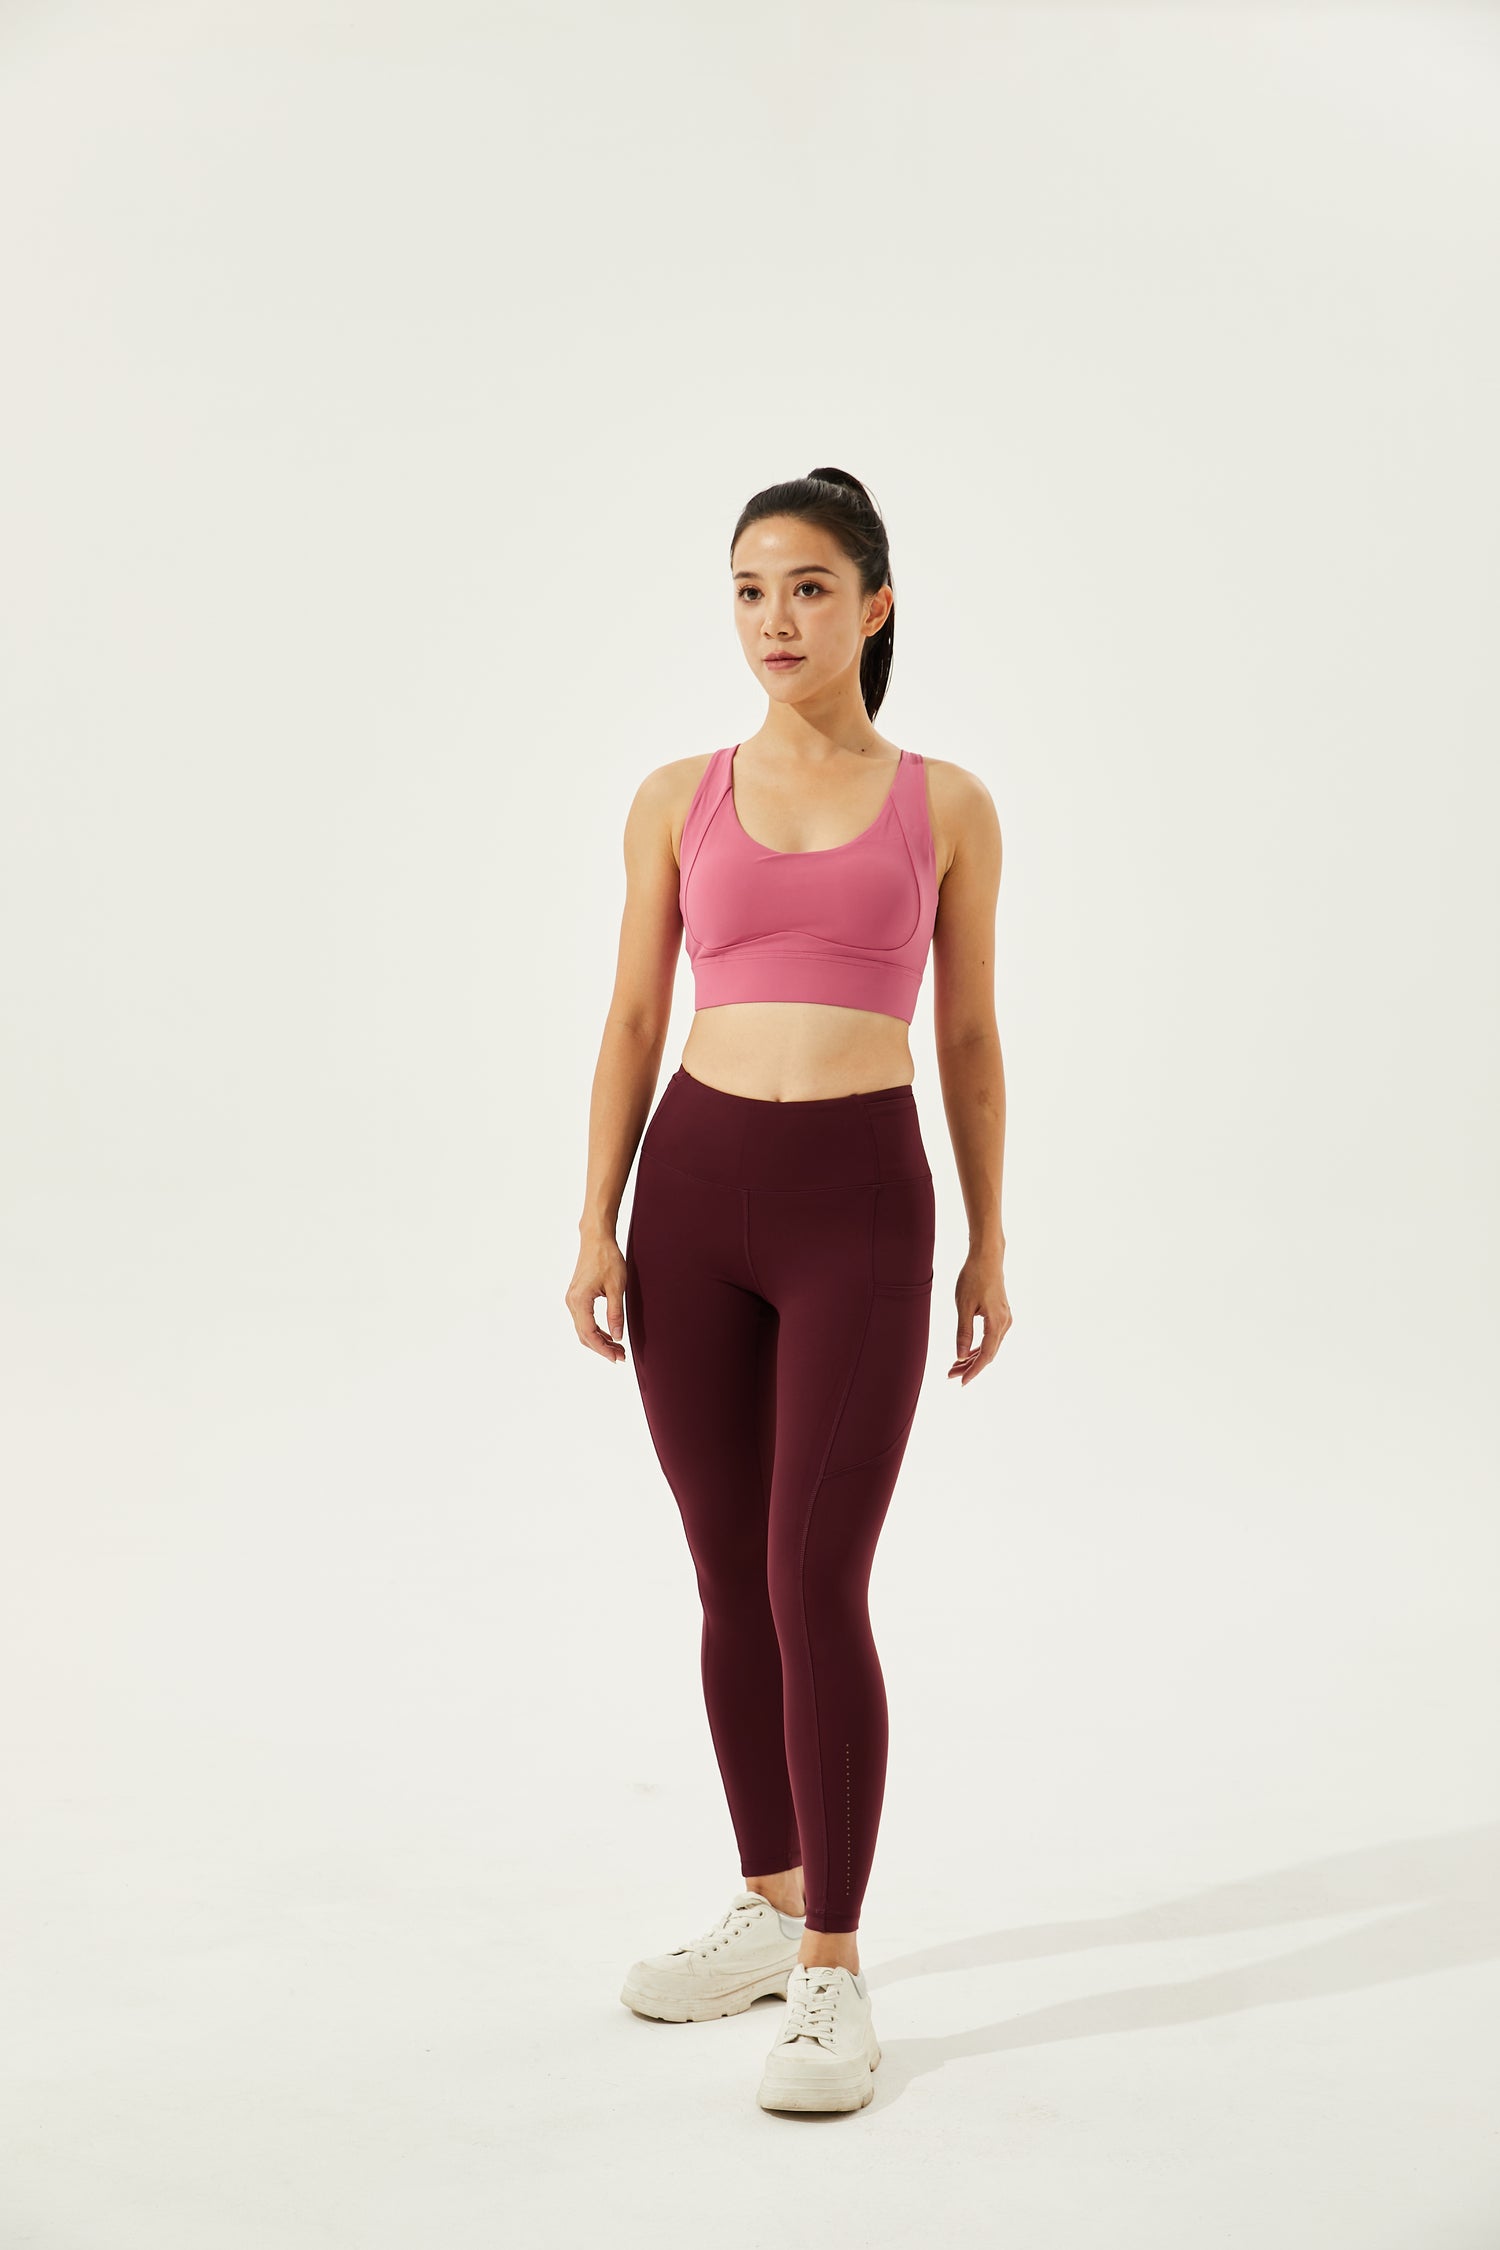 Say Goodbye to Camel Toe and Hello to Tummy-Slimming & Buttersoft Leggings  - Gym Wear Movement